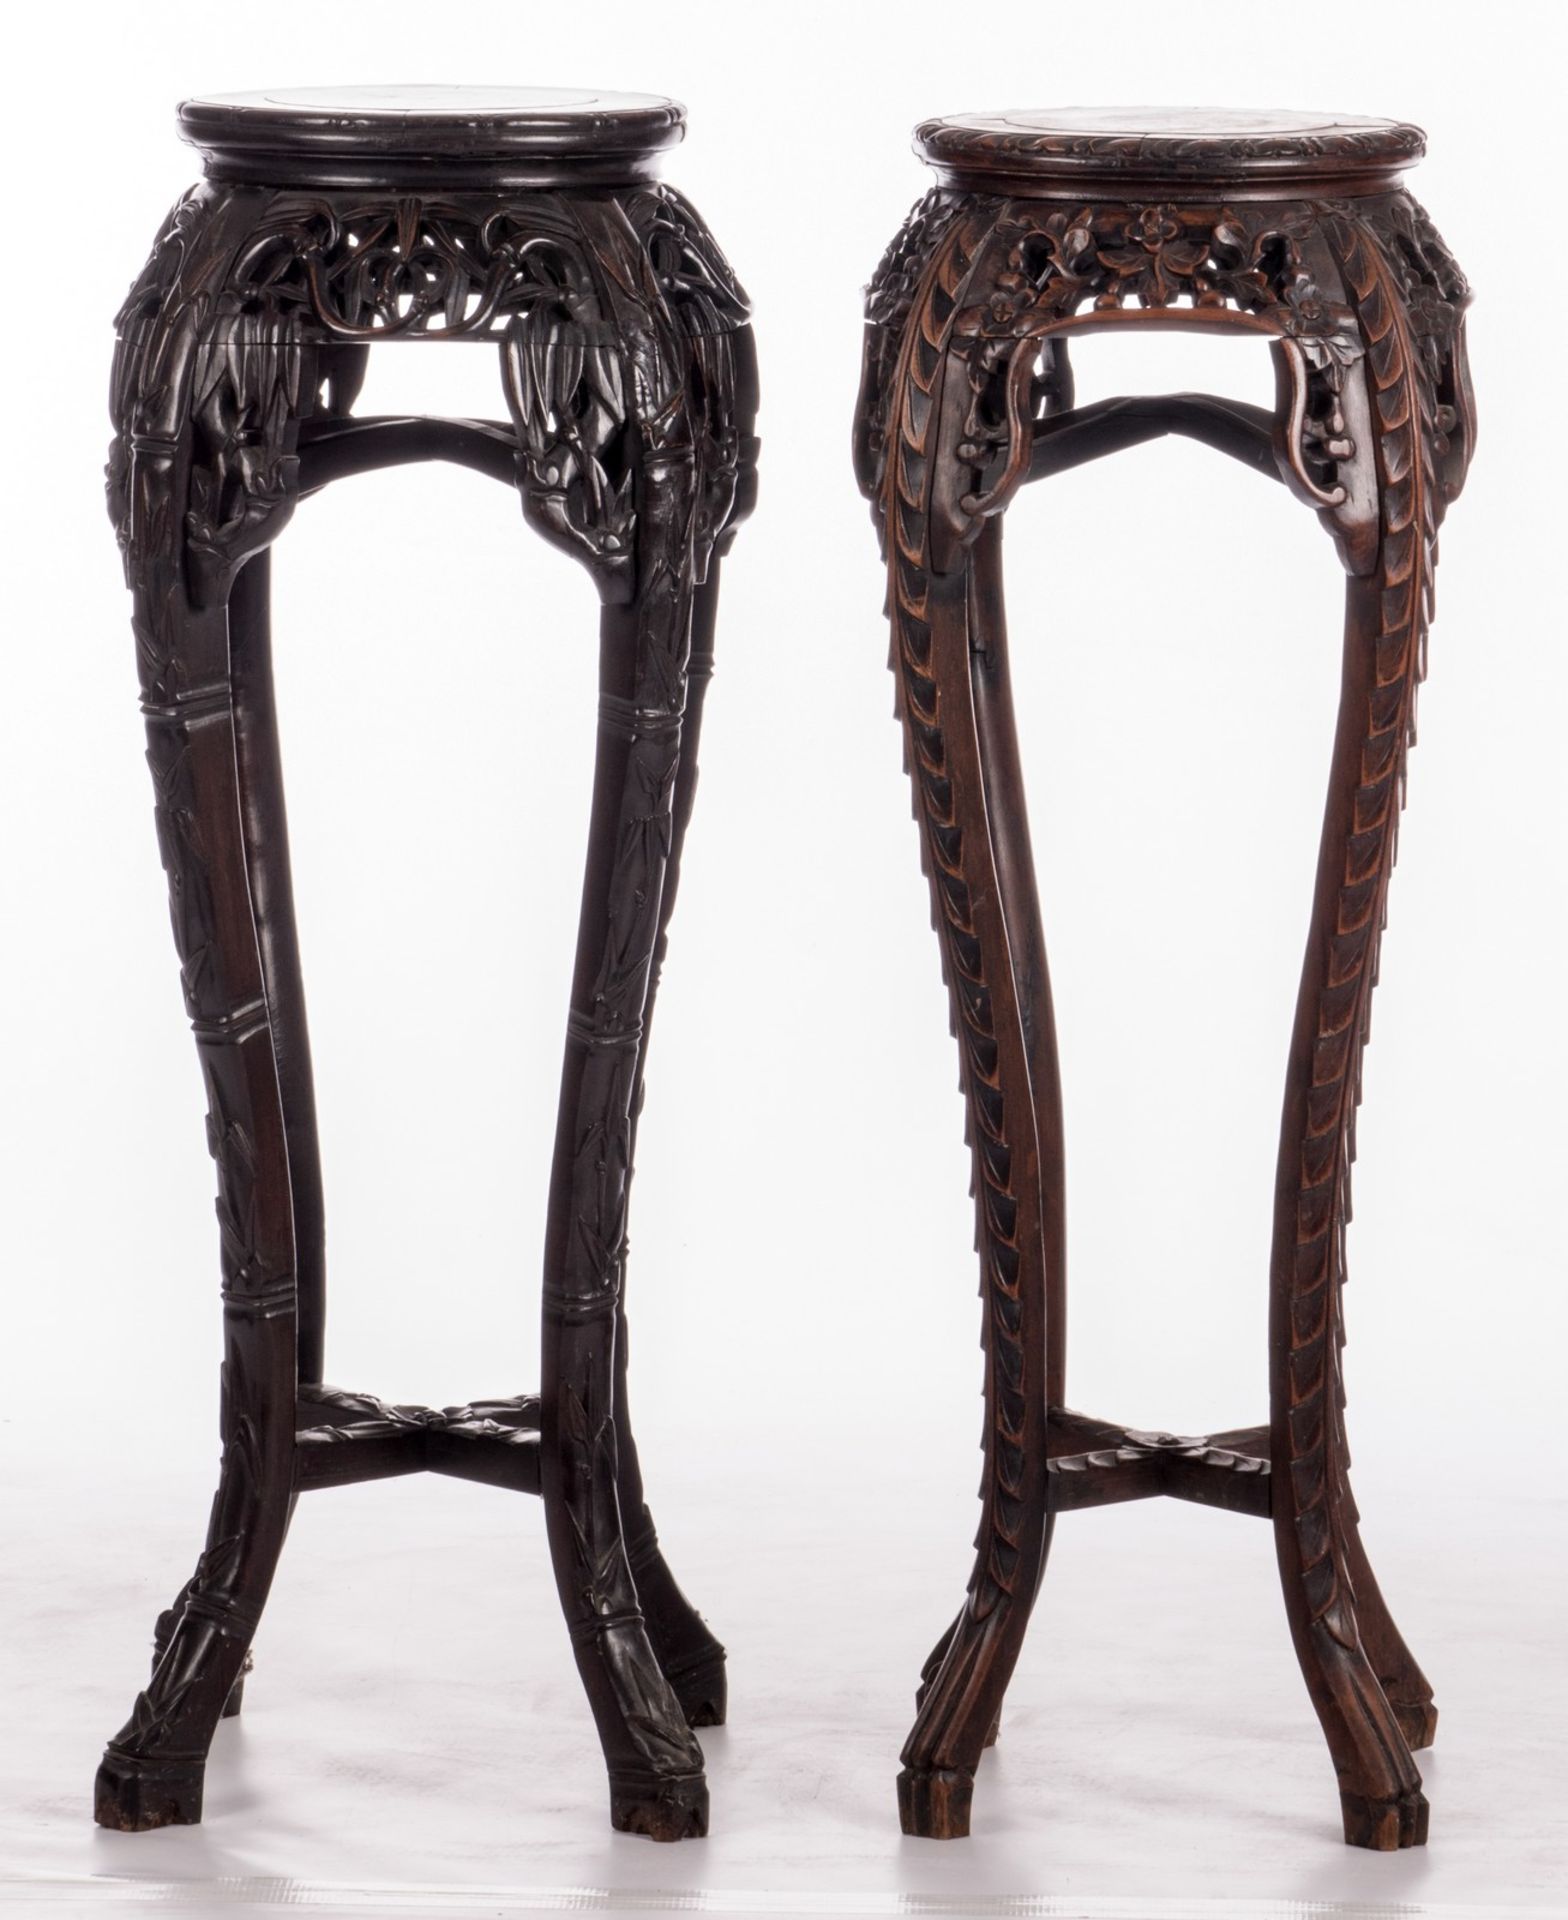 Two Chinese carved hardwood stools with marble top, about 1900, H 91 - 92 cm, Diameter 39 - 41 cm ( - Bild 4 aus 9